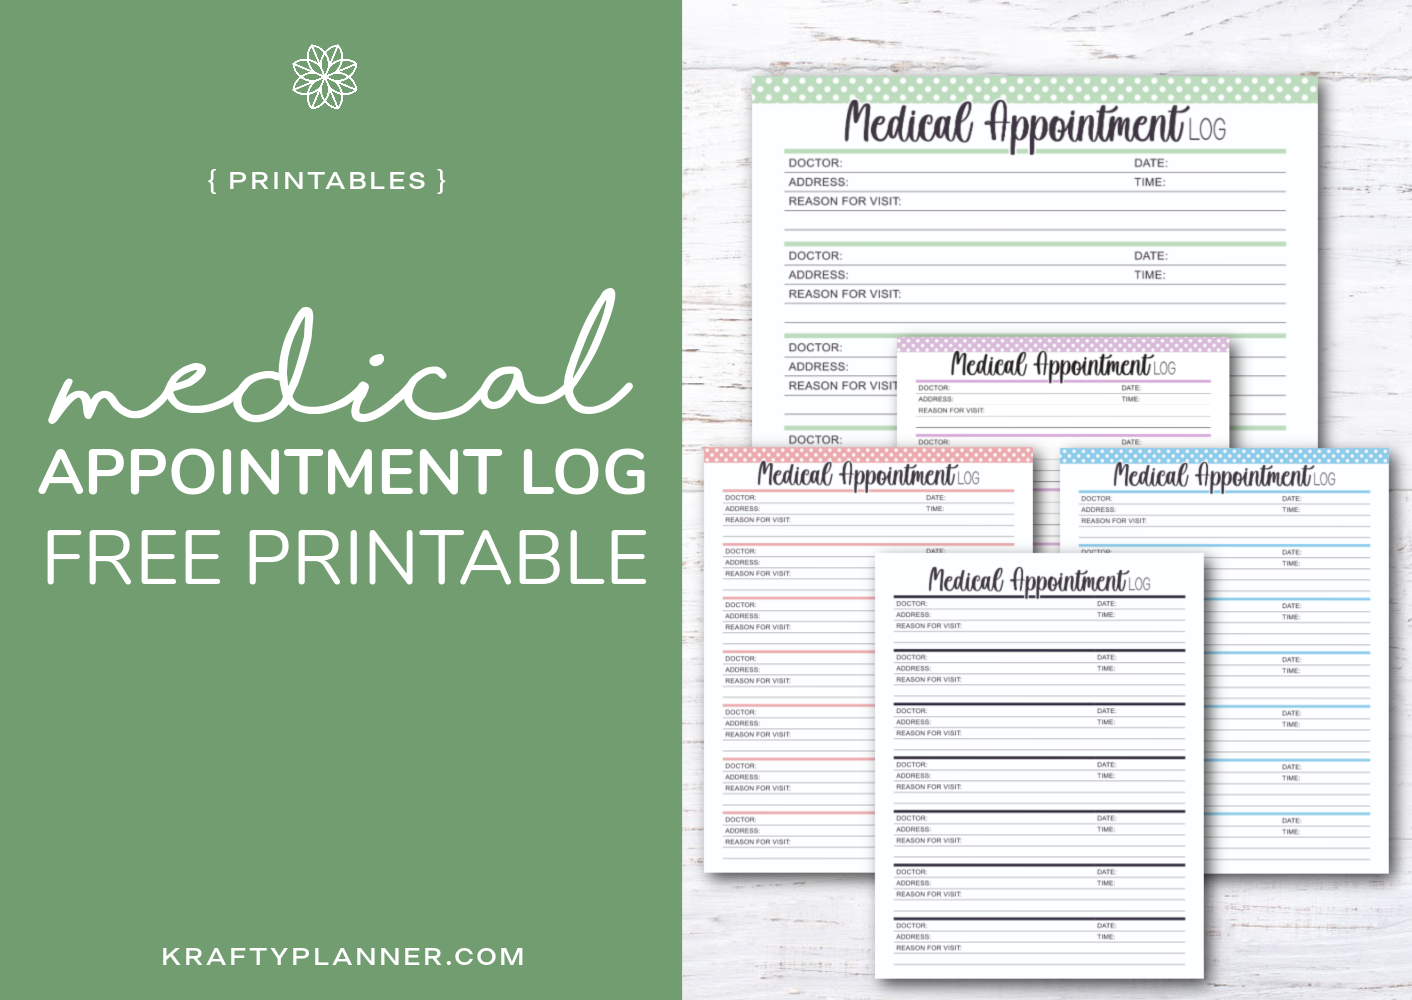 Medical Appointment Log Free Printable